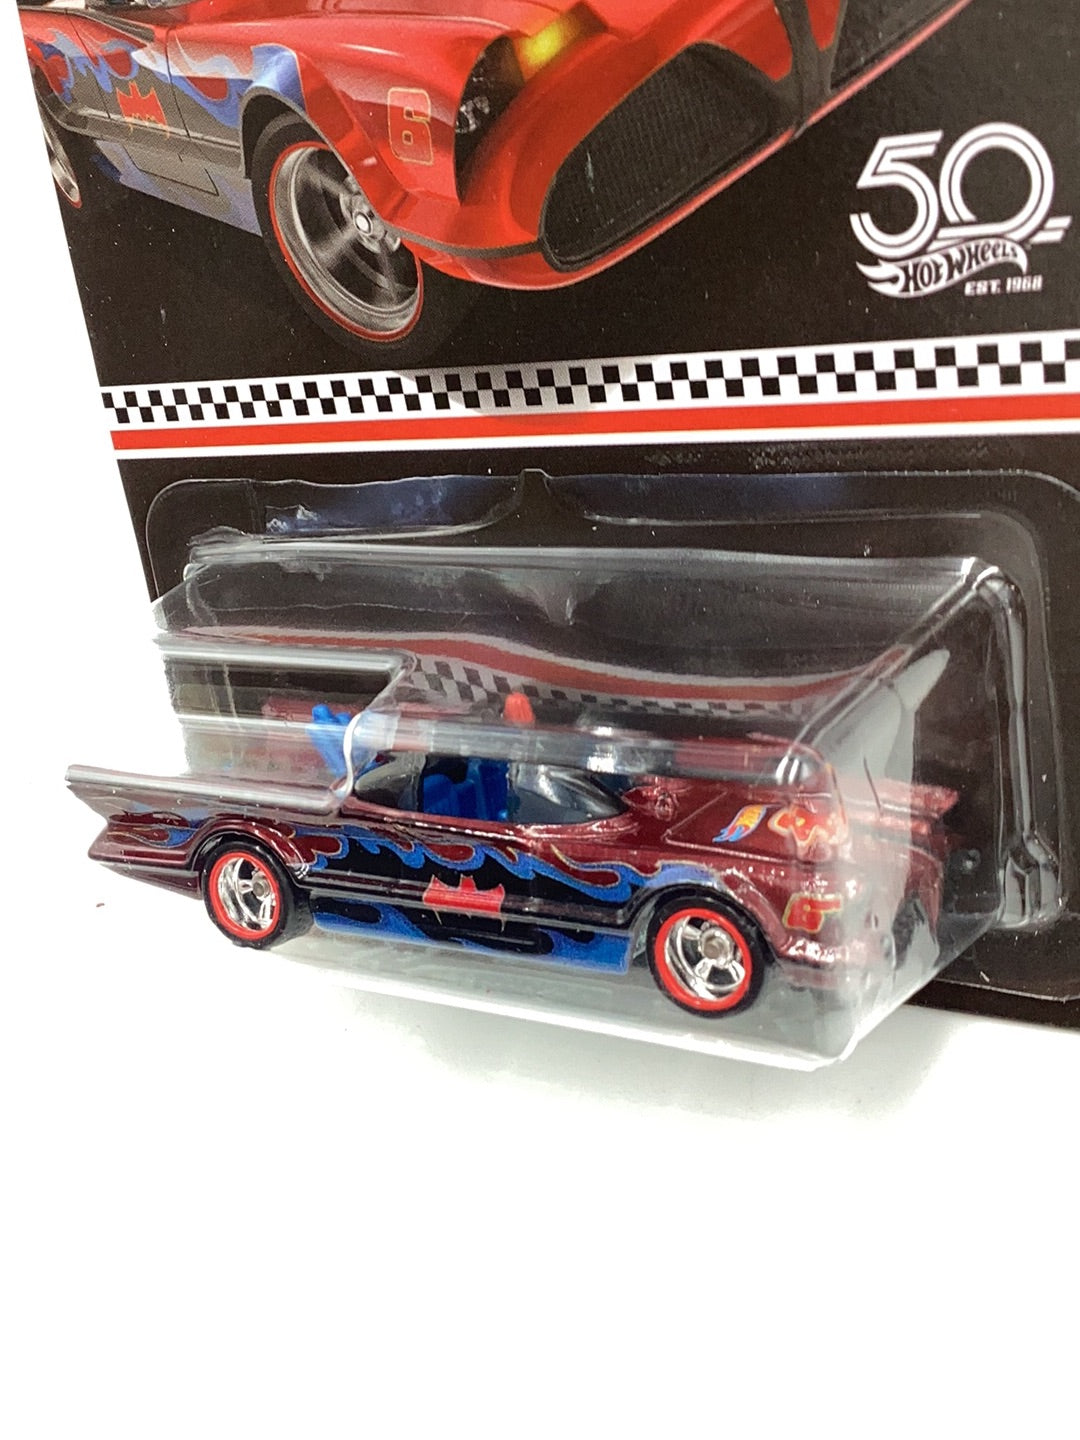 2018 Mail In Hot wheels 1966 TV Series Batmobile with Protector